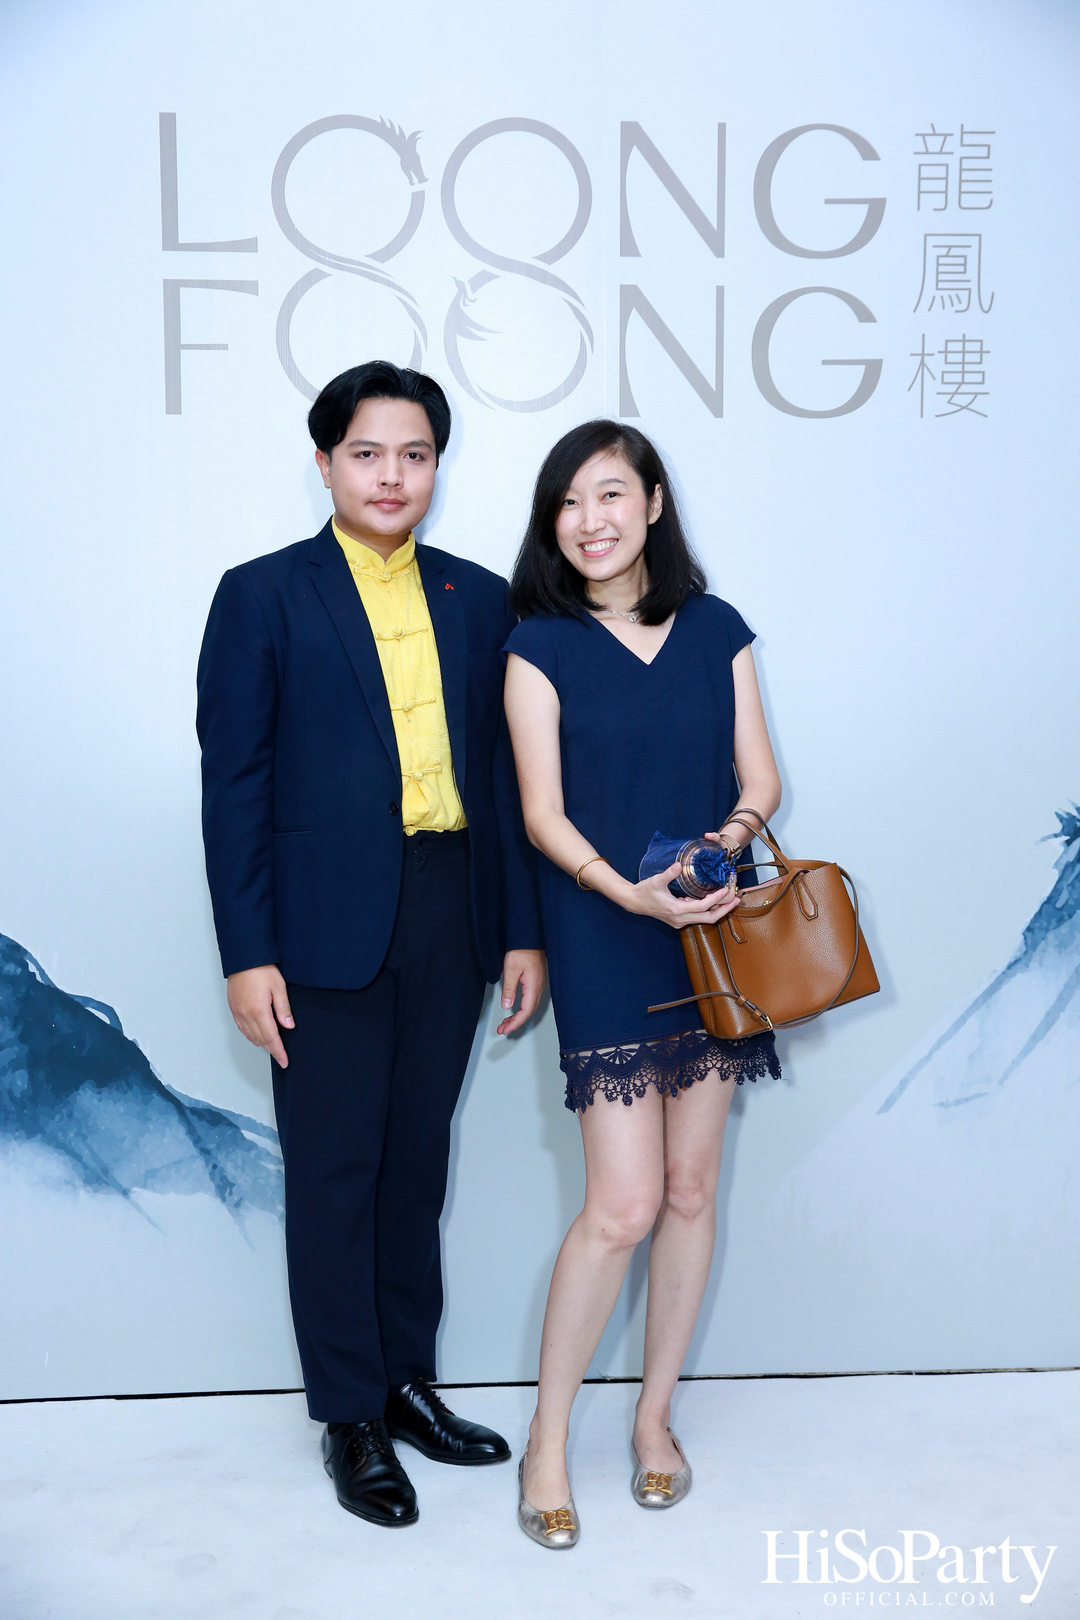 GRAND OPENING OF LOONG FOONG CHINESE RESTAURANT